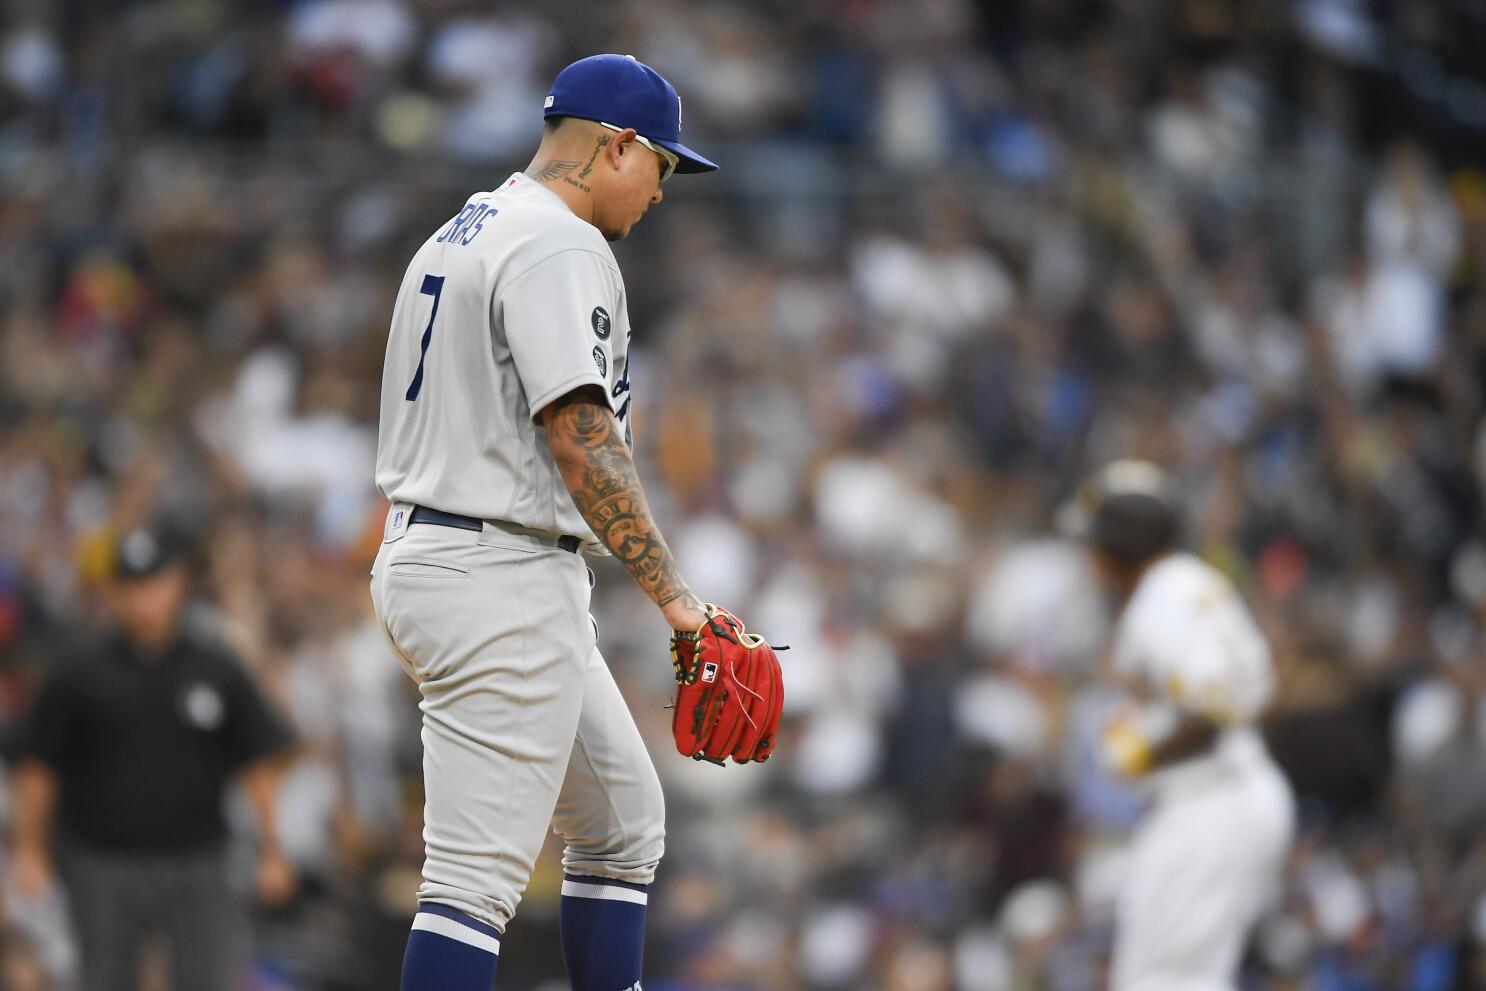 Who did the Dodgers give up for Manny Machado?